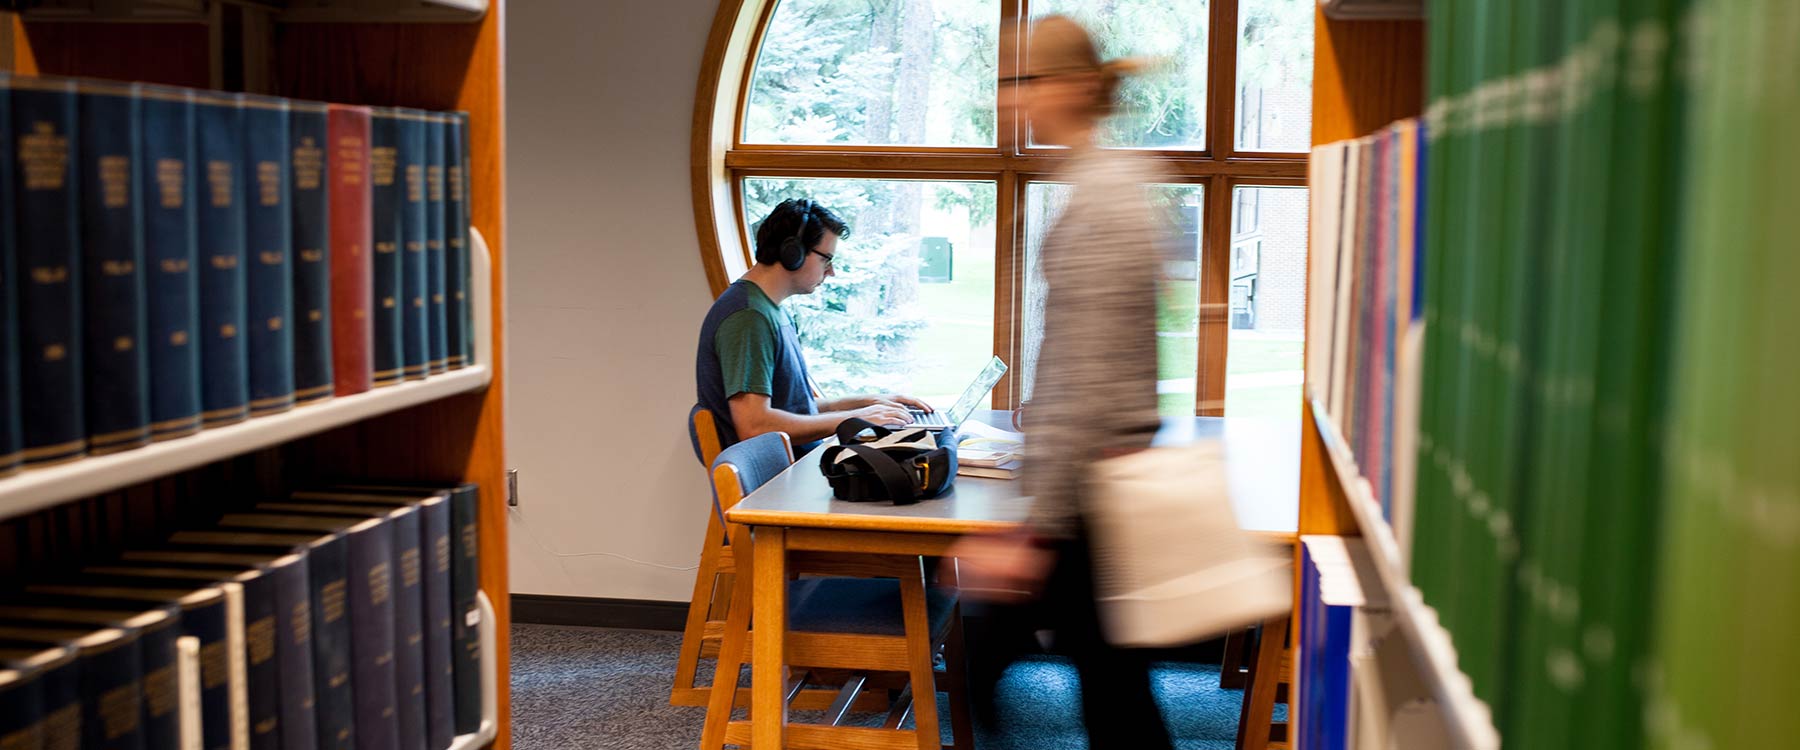 A student works on his laptop in the library, bookshelves surrounding him. Another student passes by.